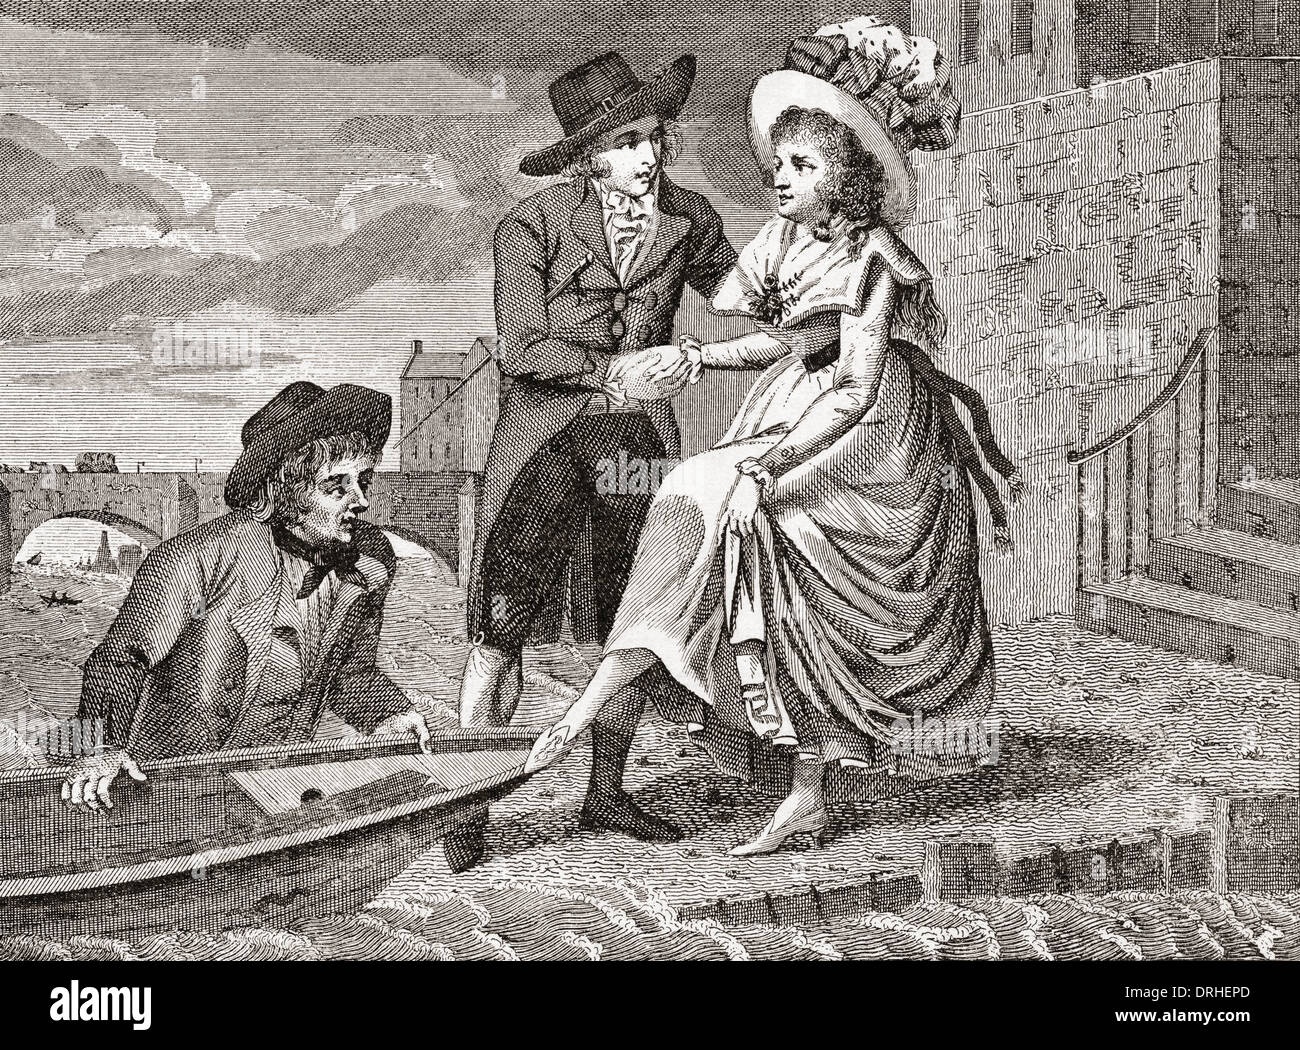 A young man helps a pretty young woman into a wherry which will cross the Thames river in London.  After an 18th century print. Stock Photo